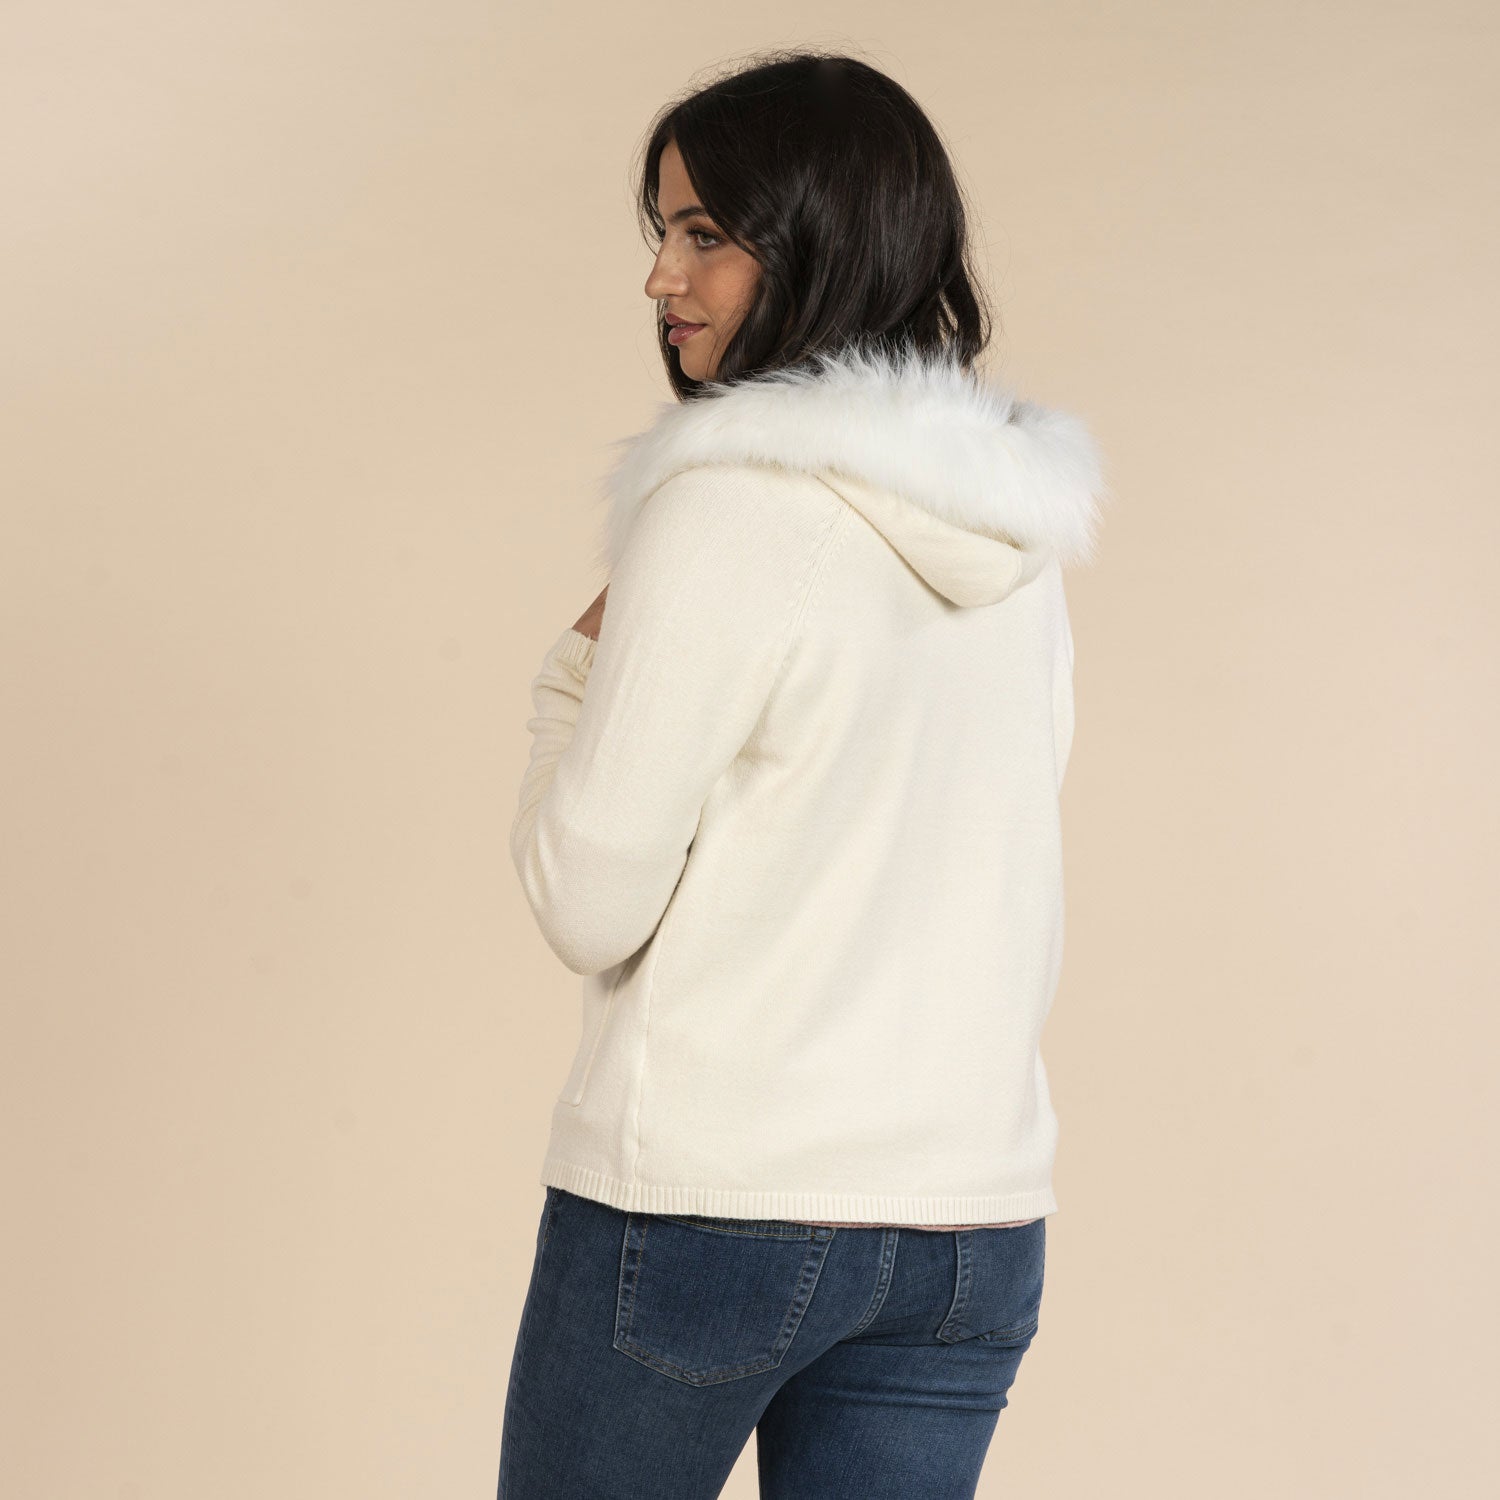 Naoise Hood Zip Front Cardigan - Ivory 3 Shaws Department Stores